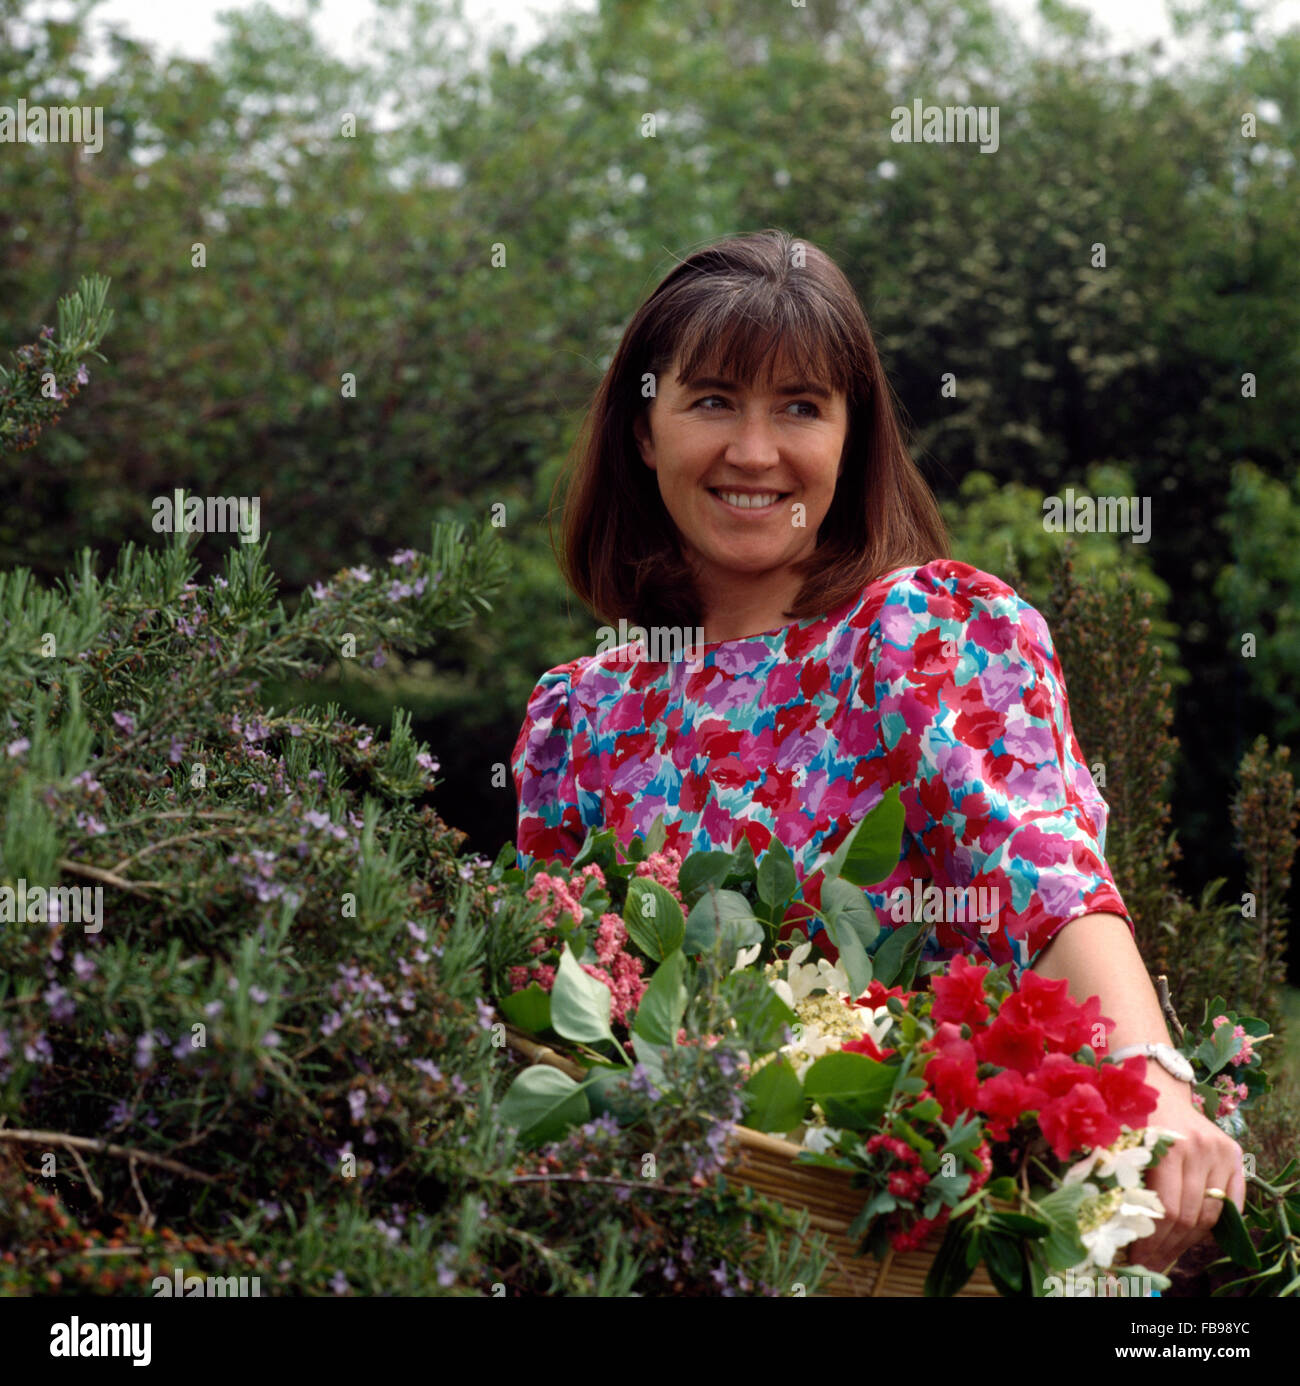 Close-up of a smiling young woman wearing a floral dress and cutting flowers in a garden Stock Photo